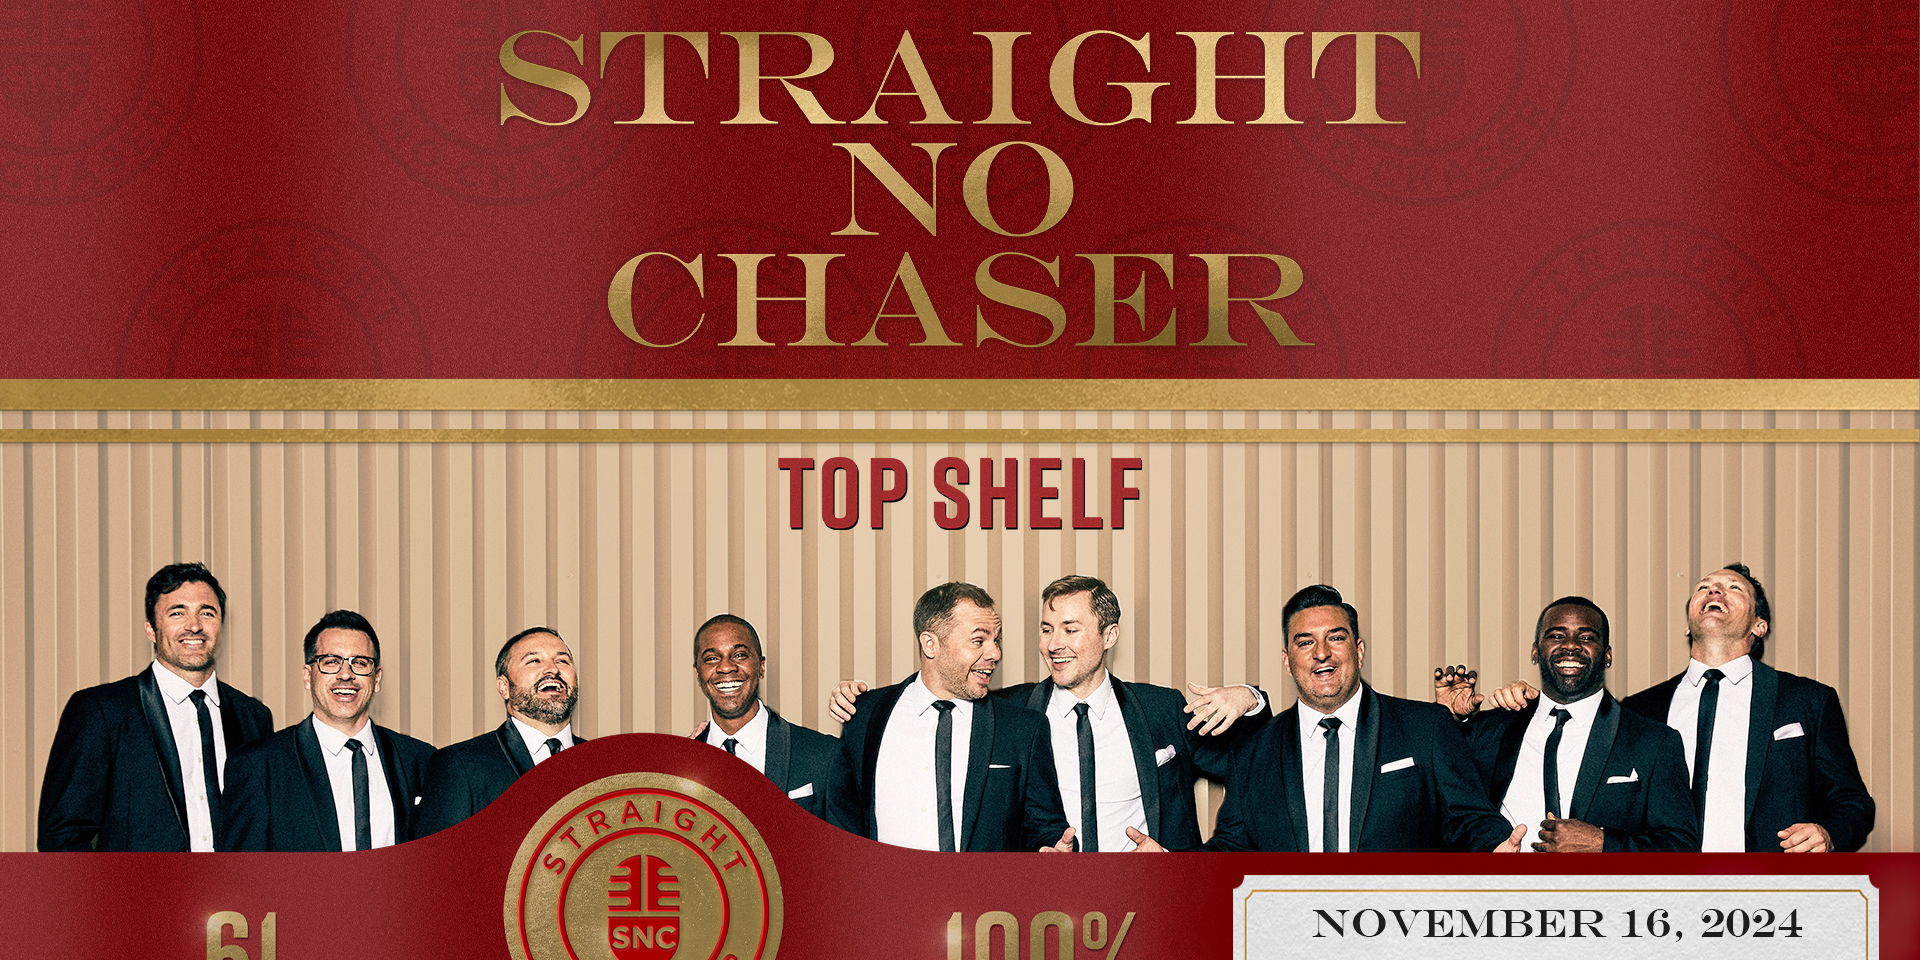 Straight No Chaser | Top Shelf Tour promotional image